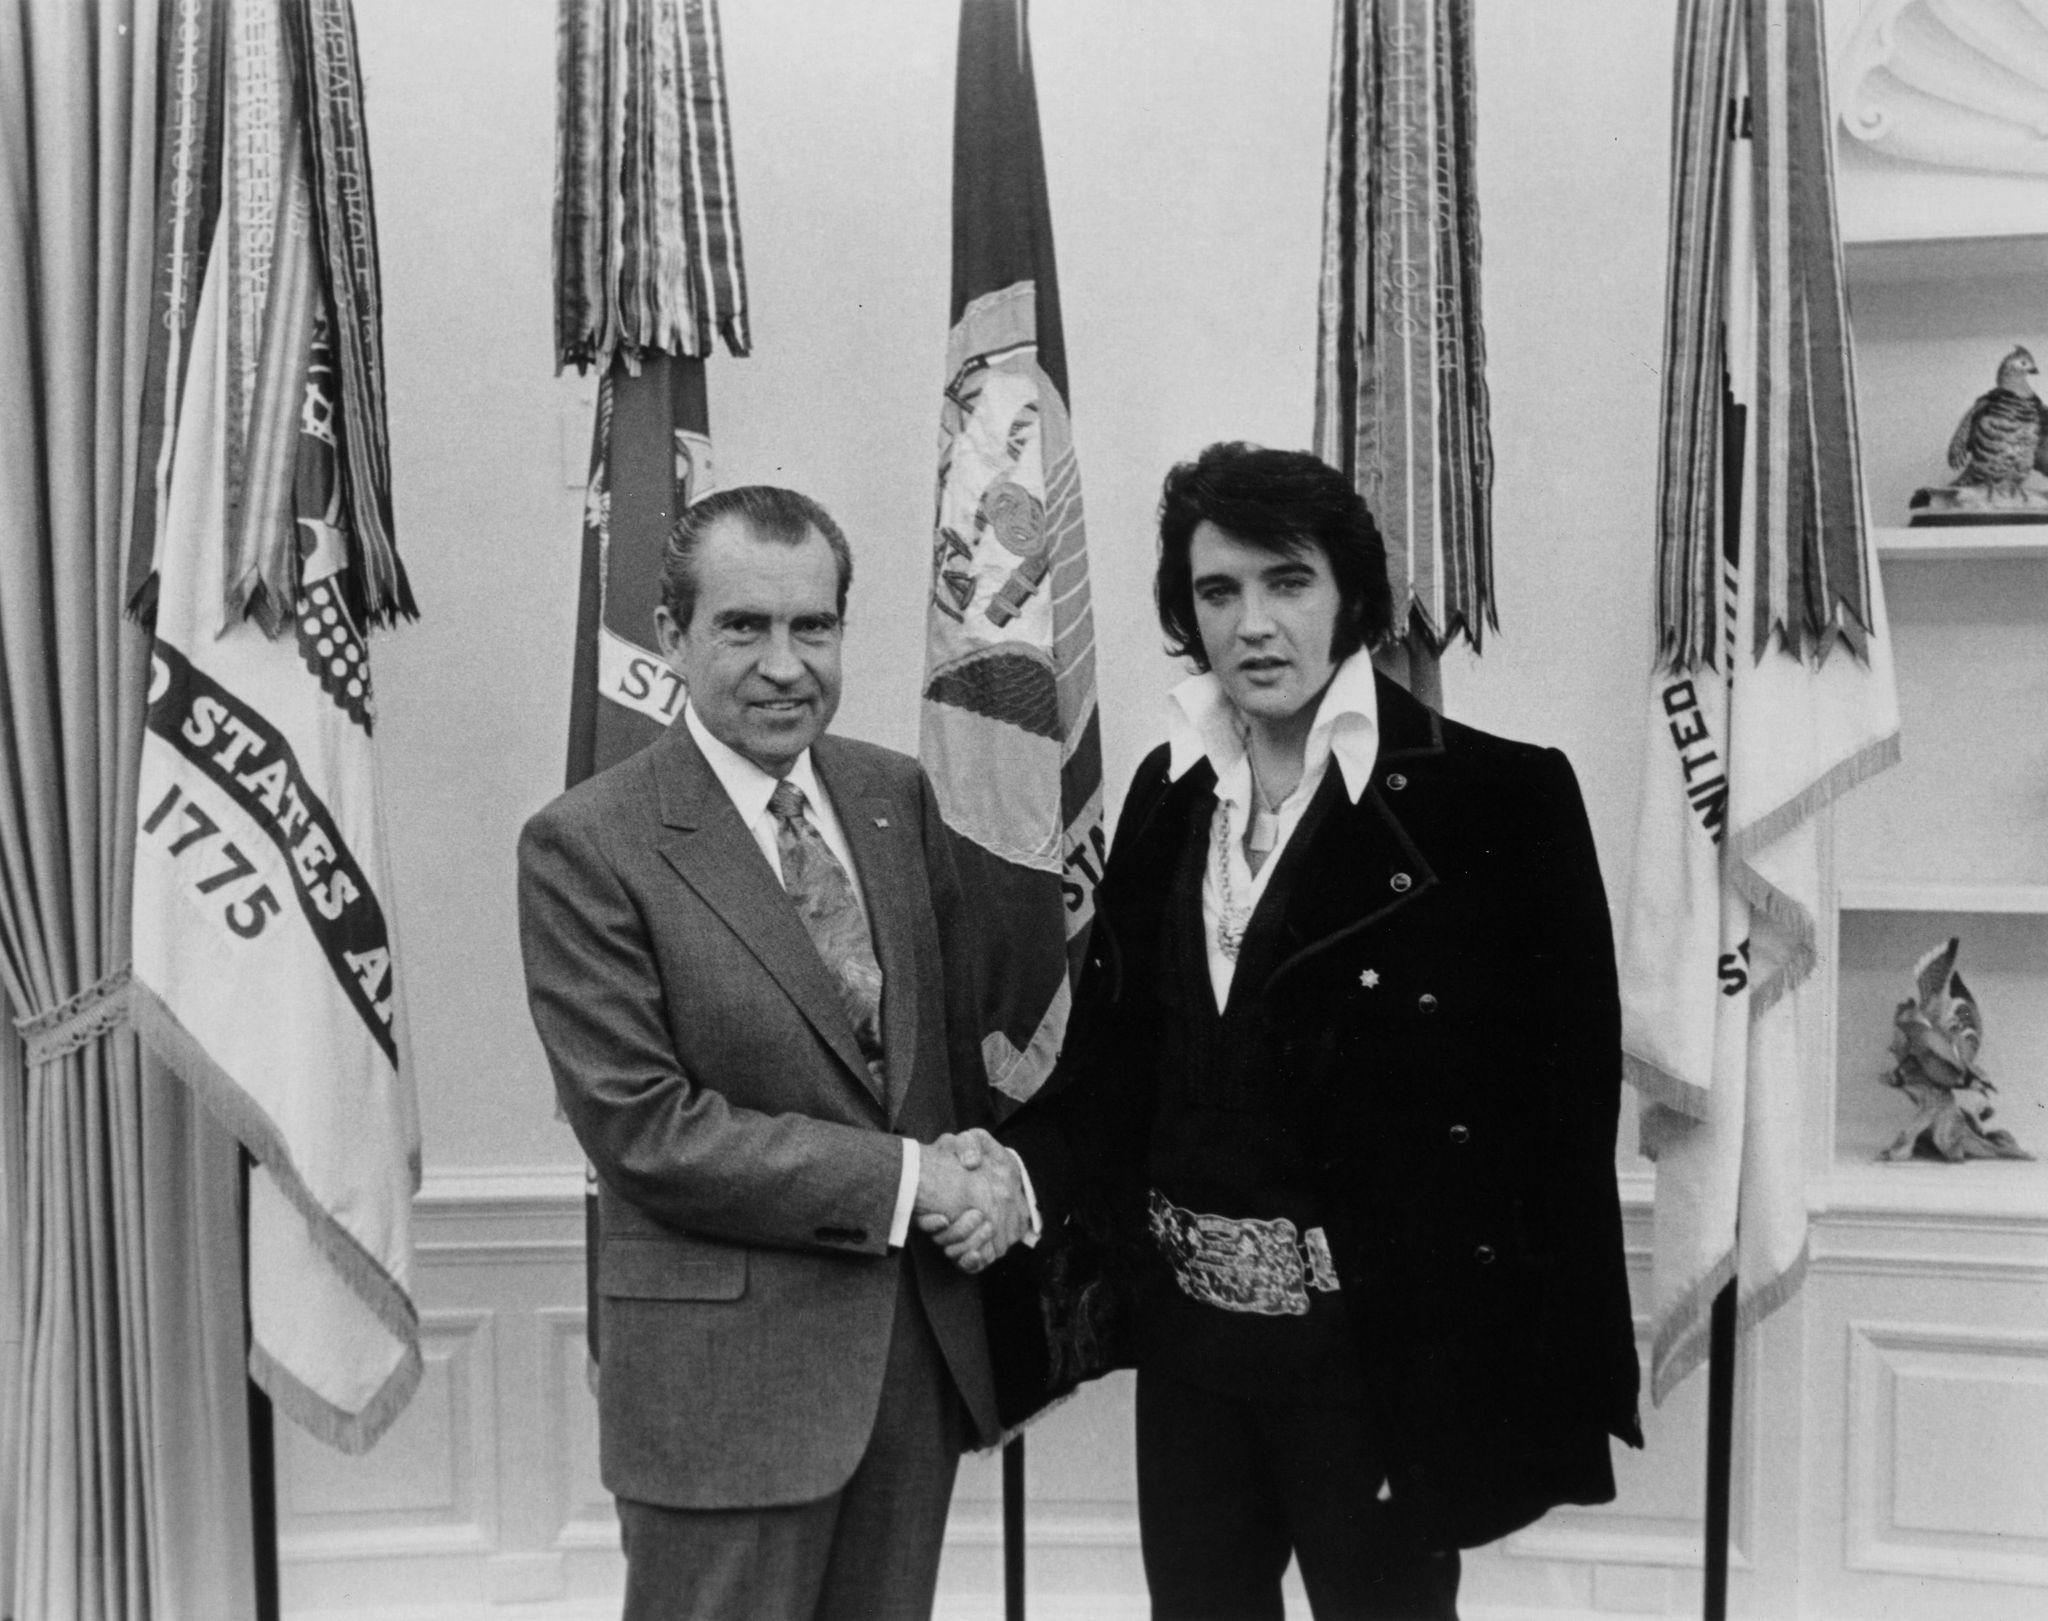 circa 1970  american singer and actor elvis aron presley 1935   1977 meets 37th president of the united states richard milhous nixon 1913   1994  photo by mpigetty images